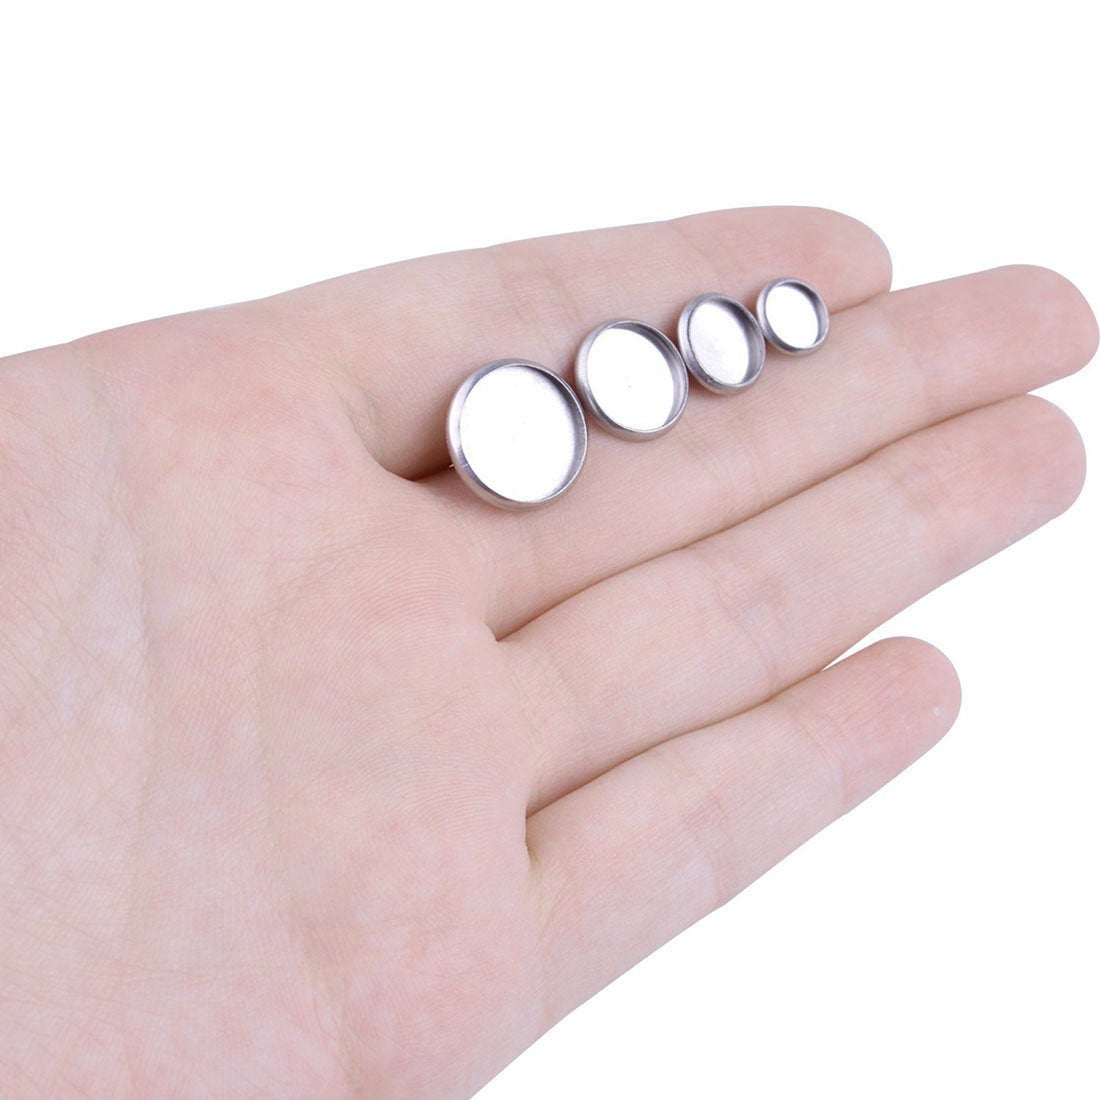 10 Stainless steel ear stud cabochon settings - fits 6, 8, 10 or 12mm cabochons